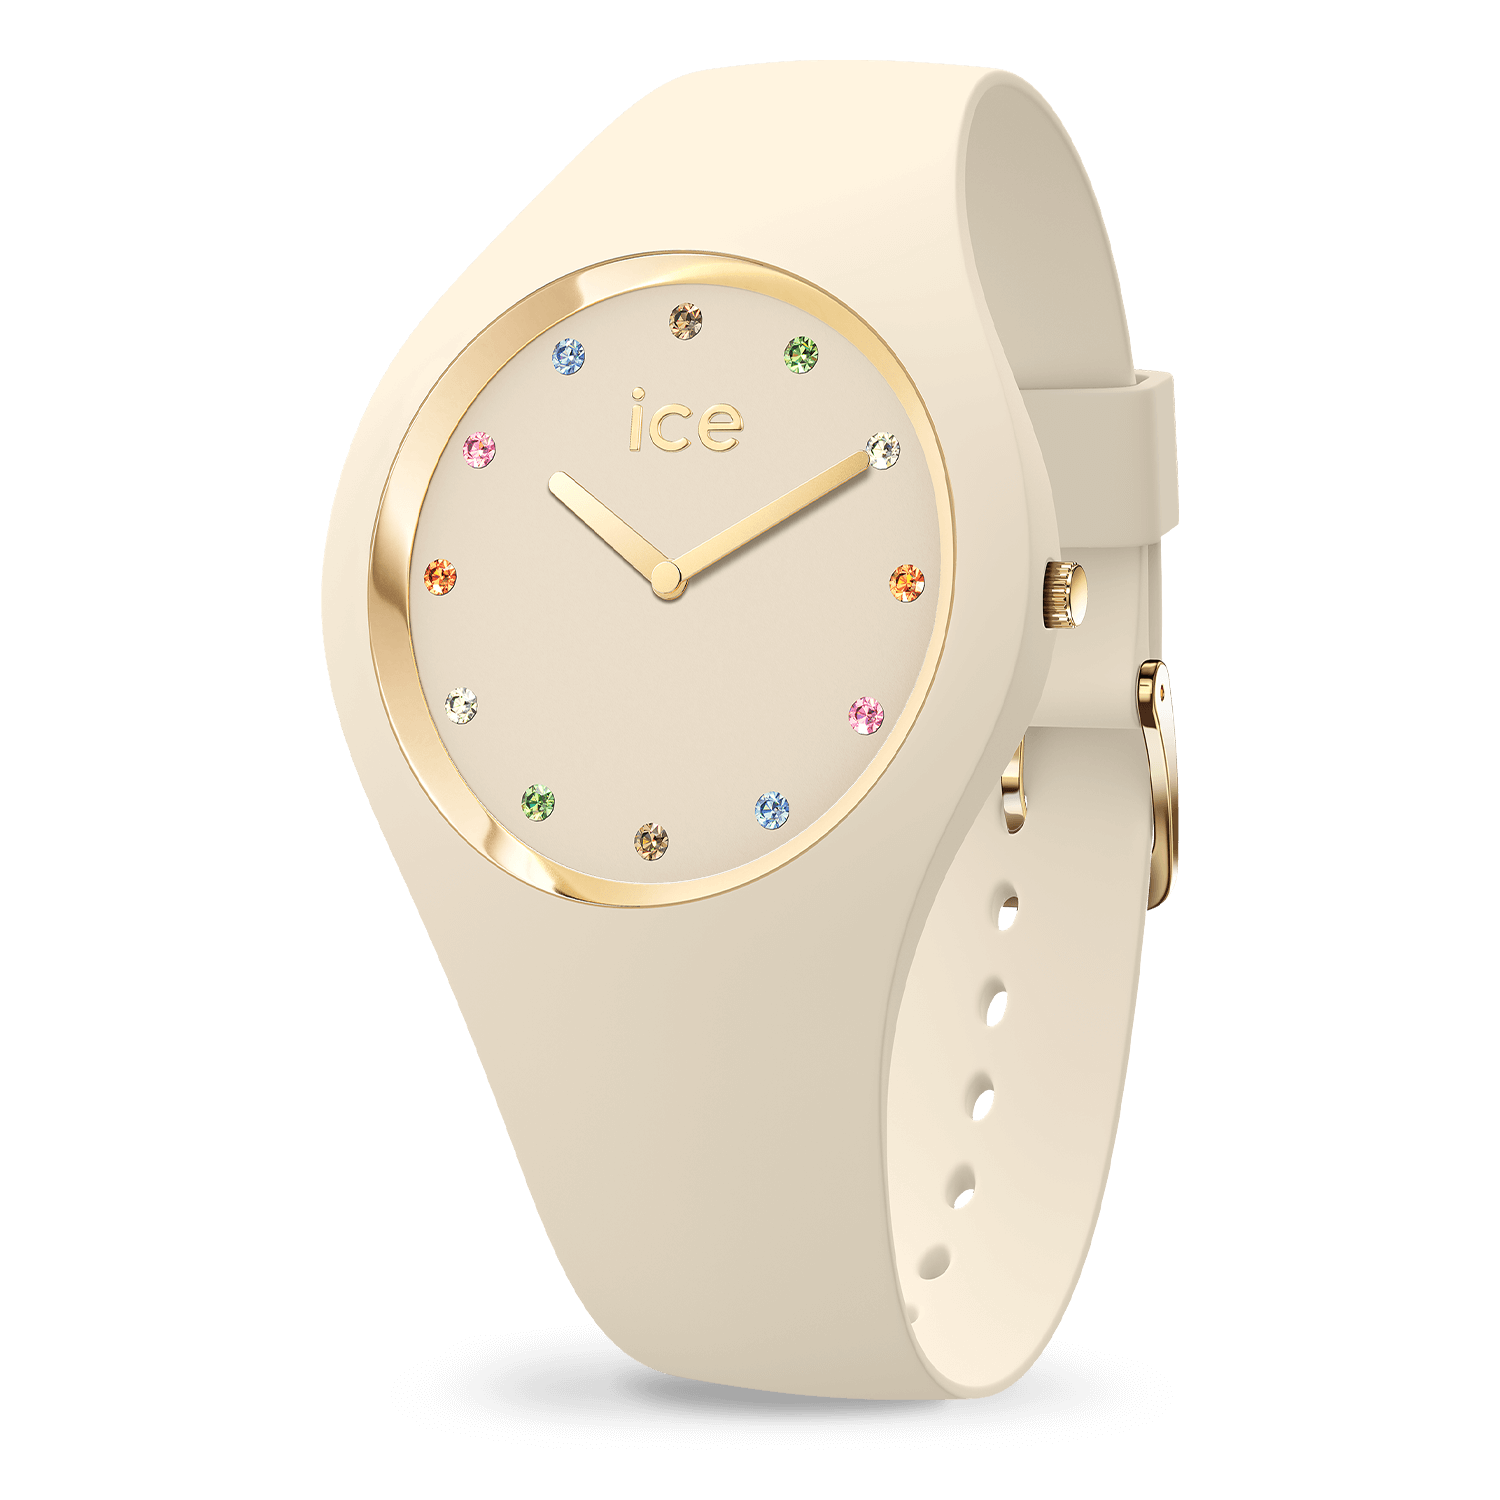 Montre femme Ice Watch Ice Cosmos Pink lady